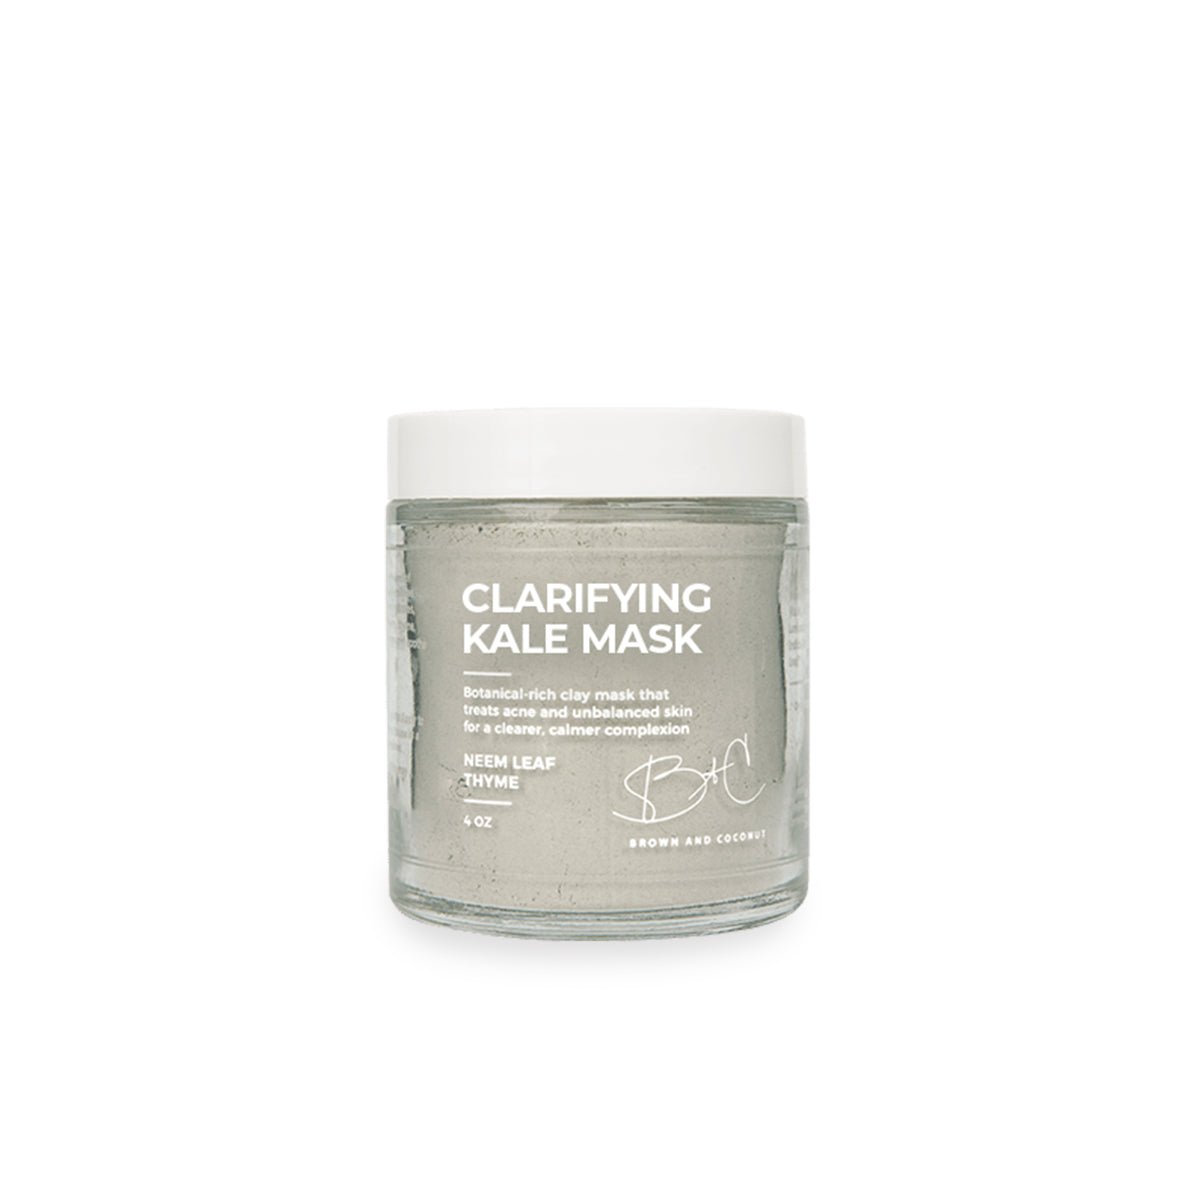 Clarifying Kale Mask by Brown & Coconut. Made in USA.